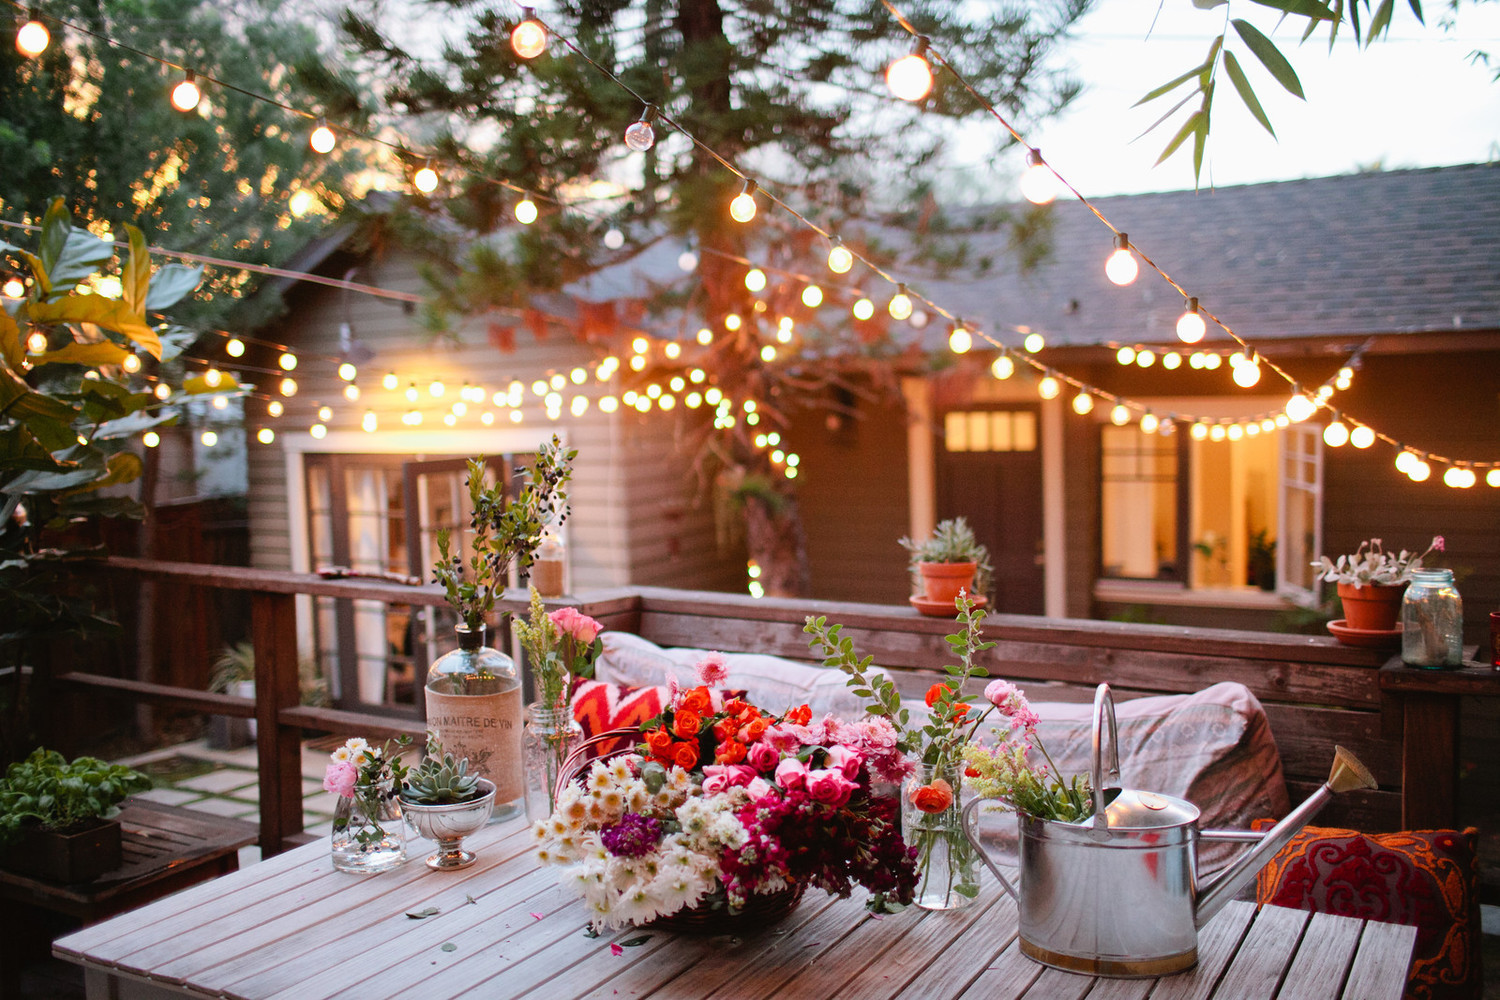 Backyard Party Lighting Ideas
 A New Pergola on the Deck from Thrifty Decor Chick